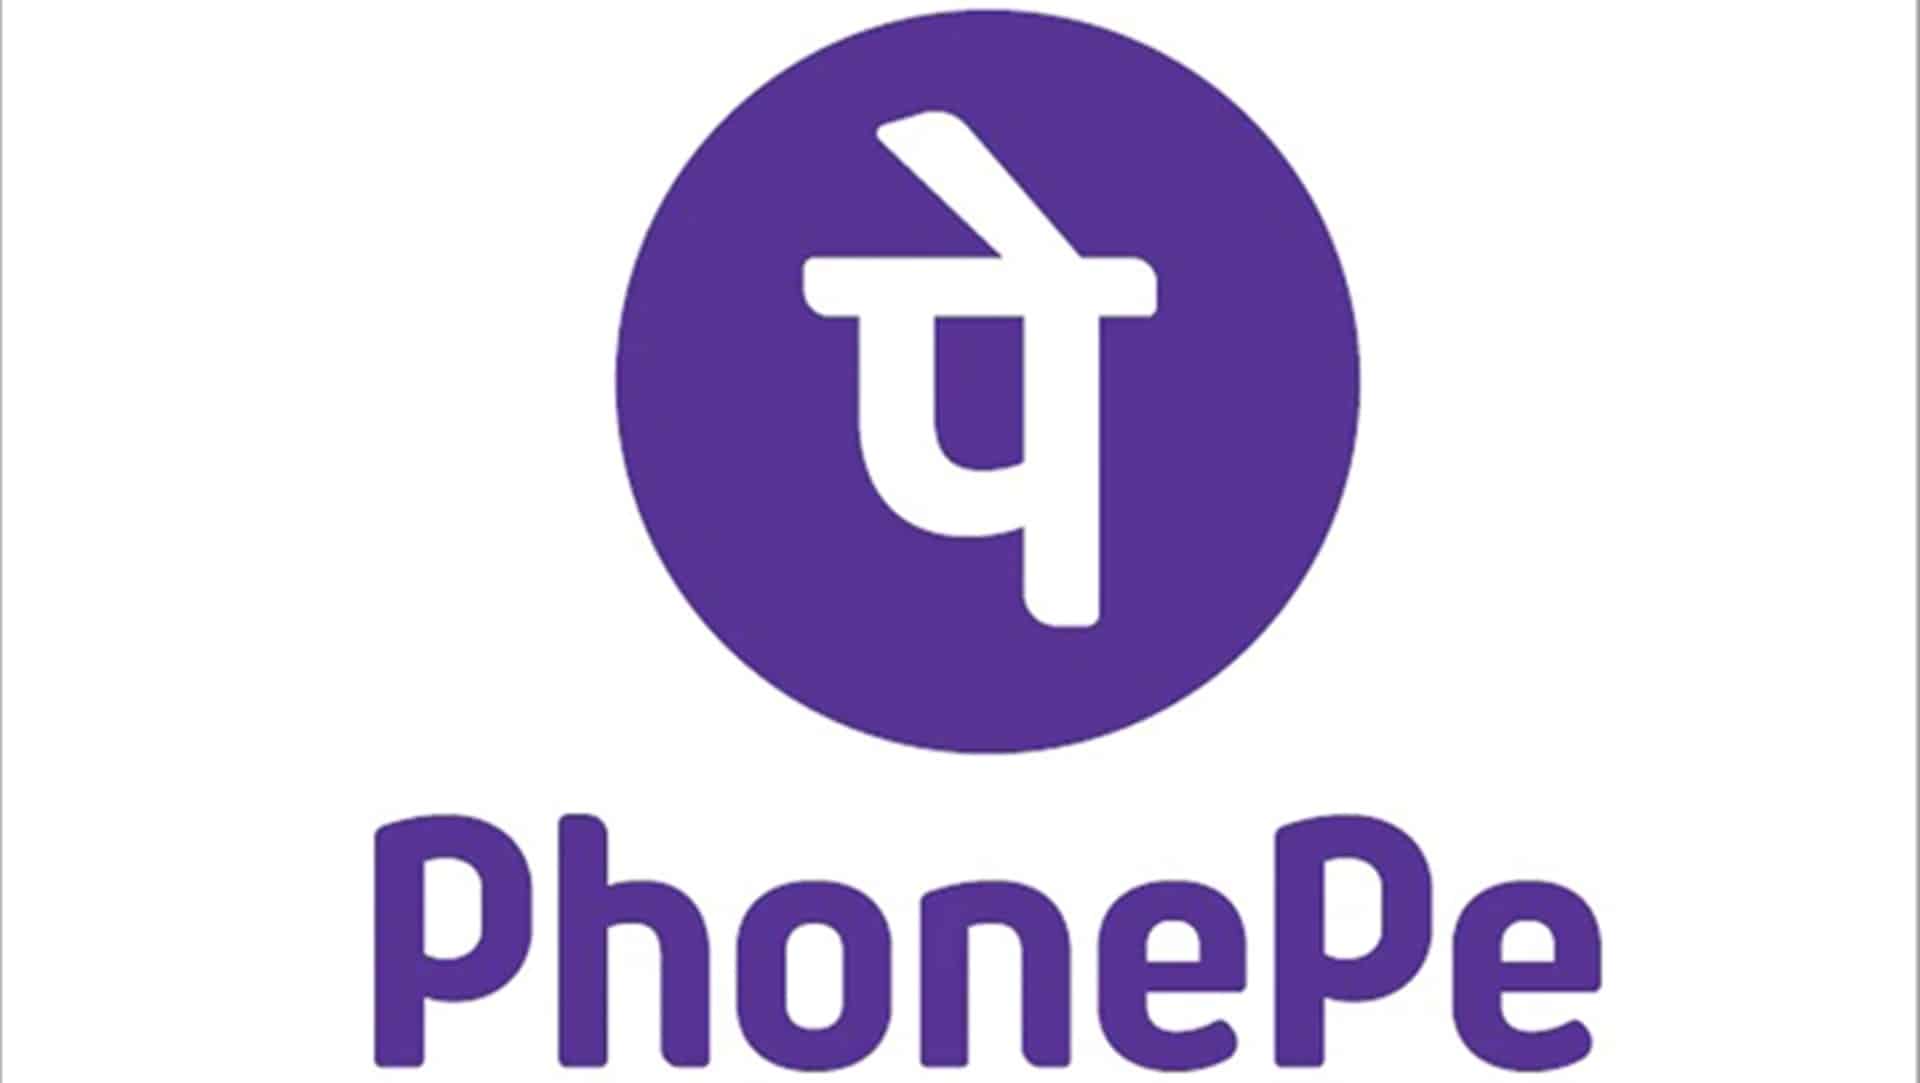 Walmart-backed PhonePe to buy WealthDesk and OpenQ for USD 75 mn